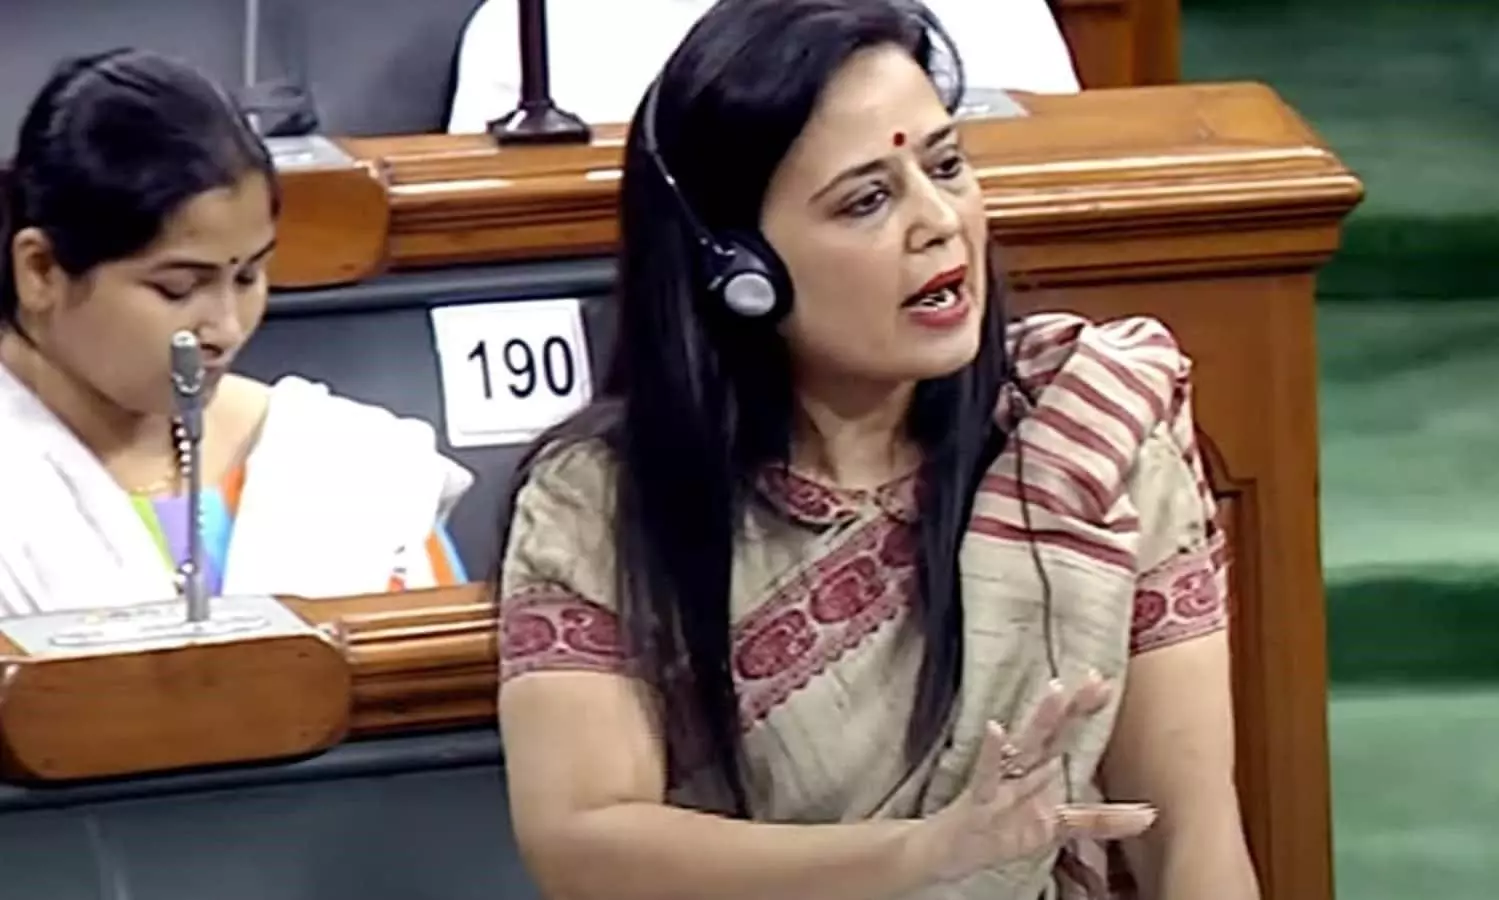 Cash-for-query row: Ethics panel report recommends Moitra’s expulsion from LS